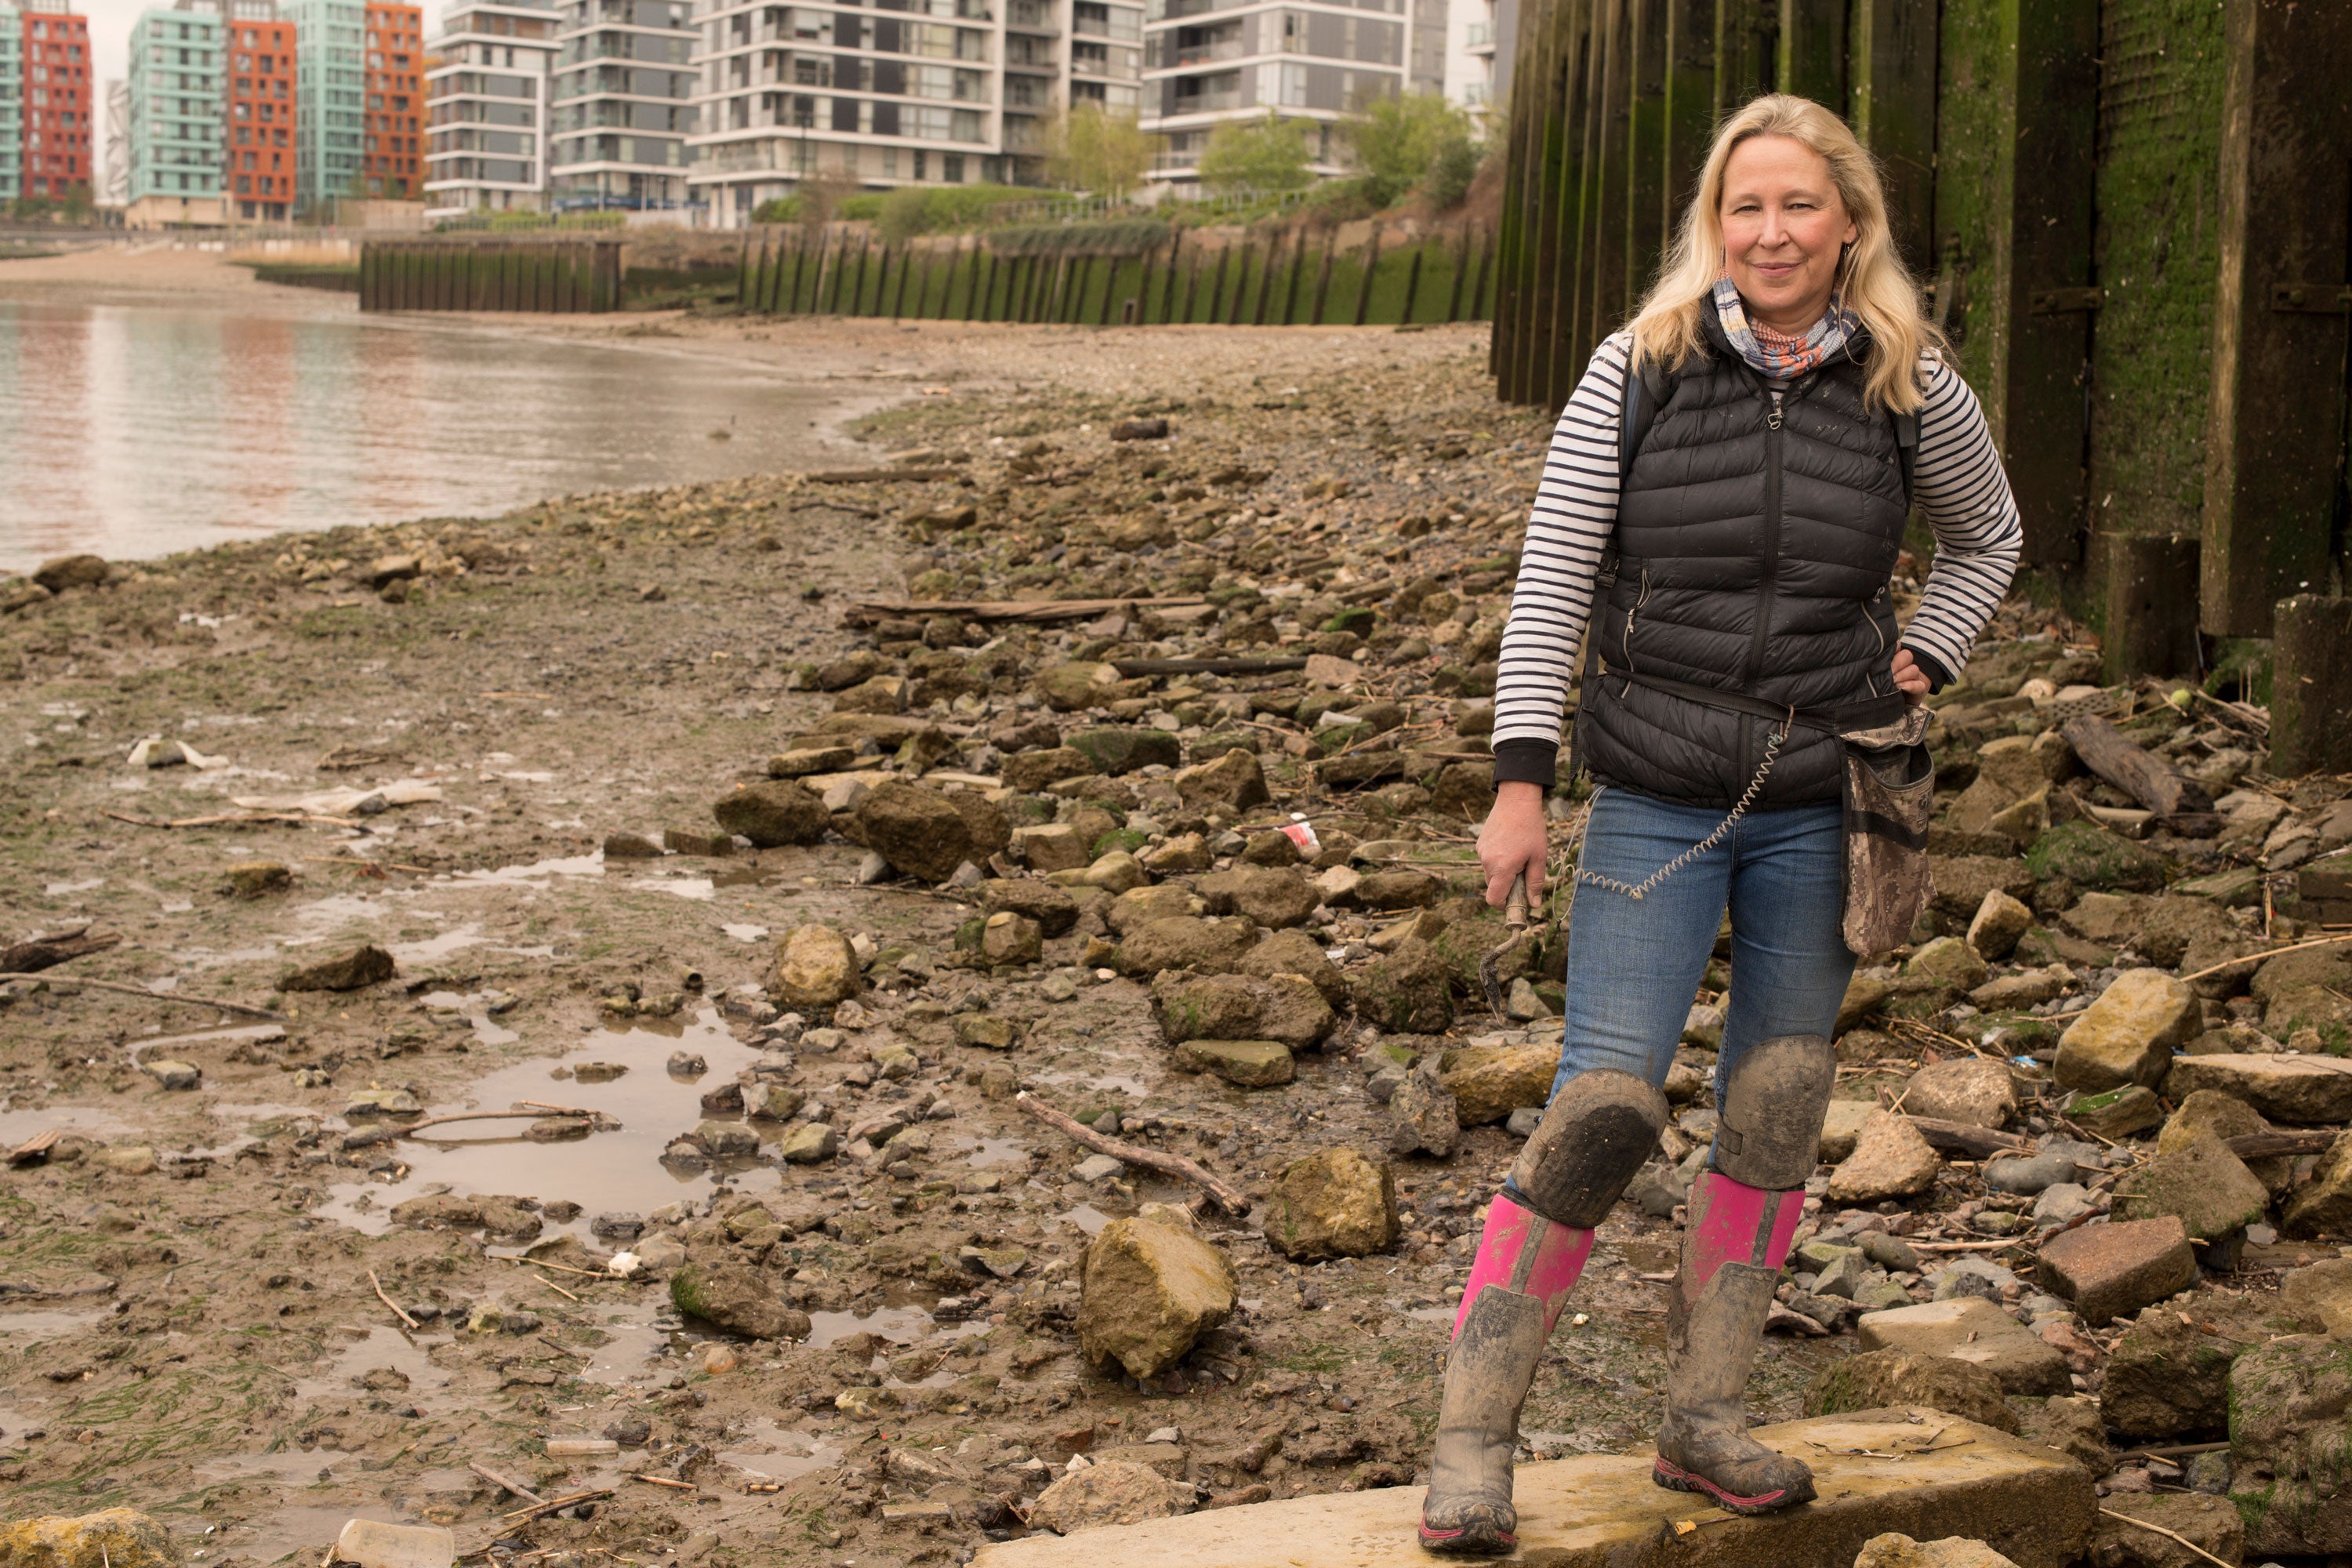 Nicola stood on rocks with the flood barrier behind her